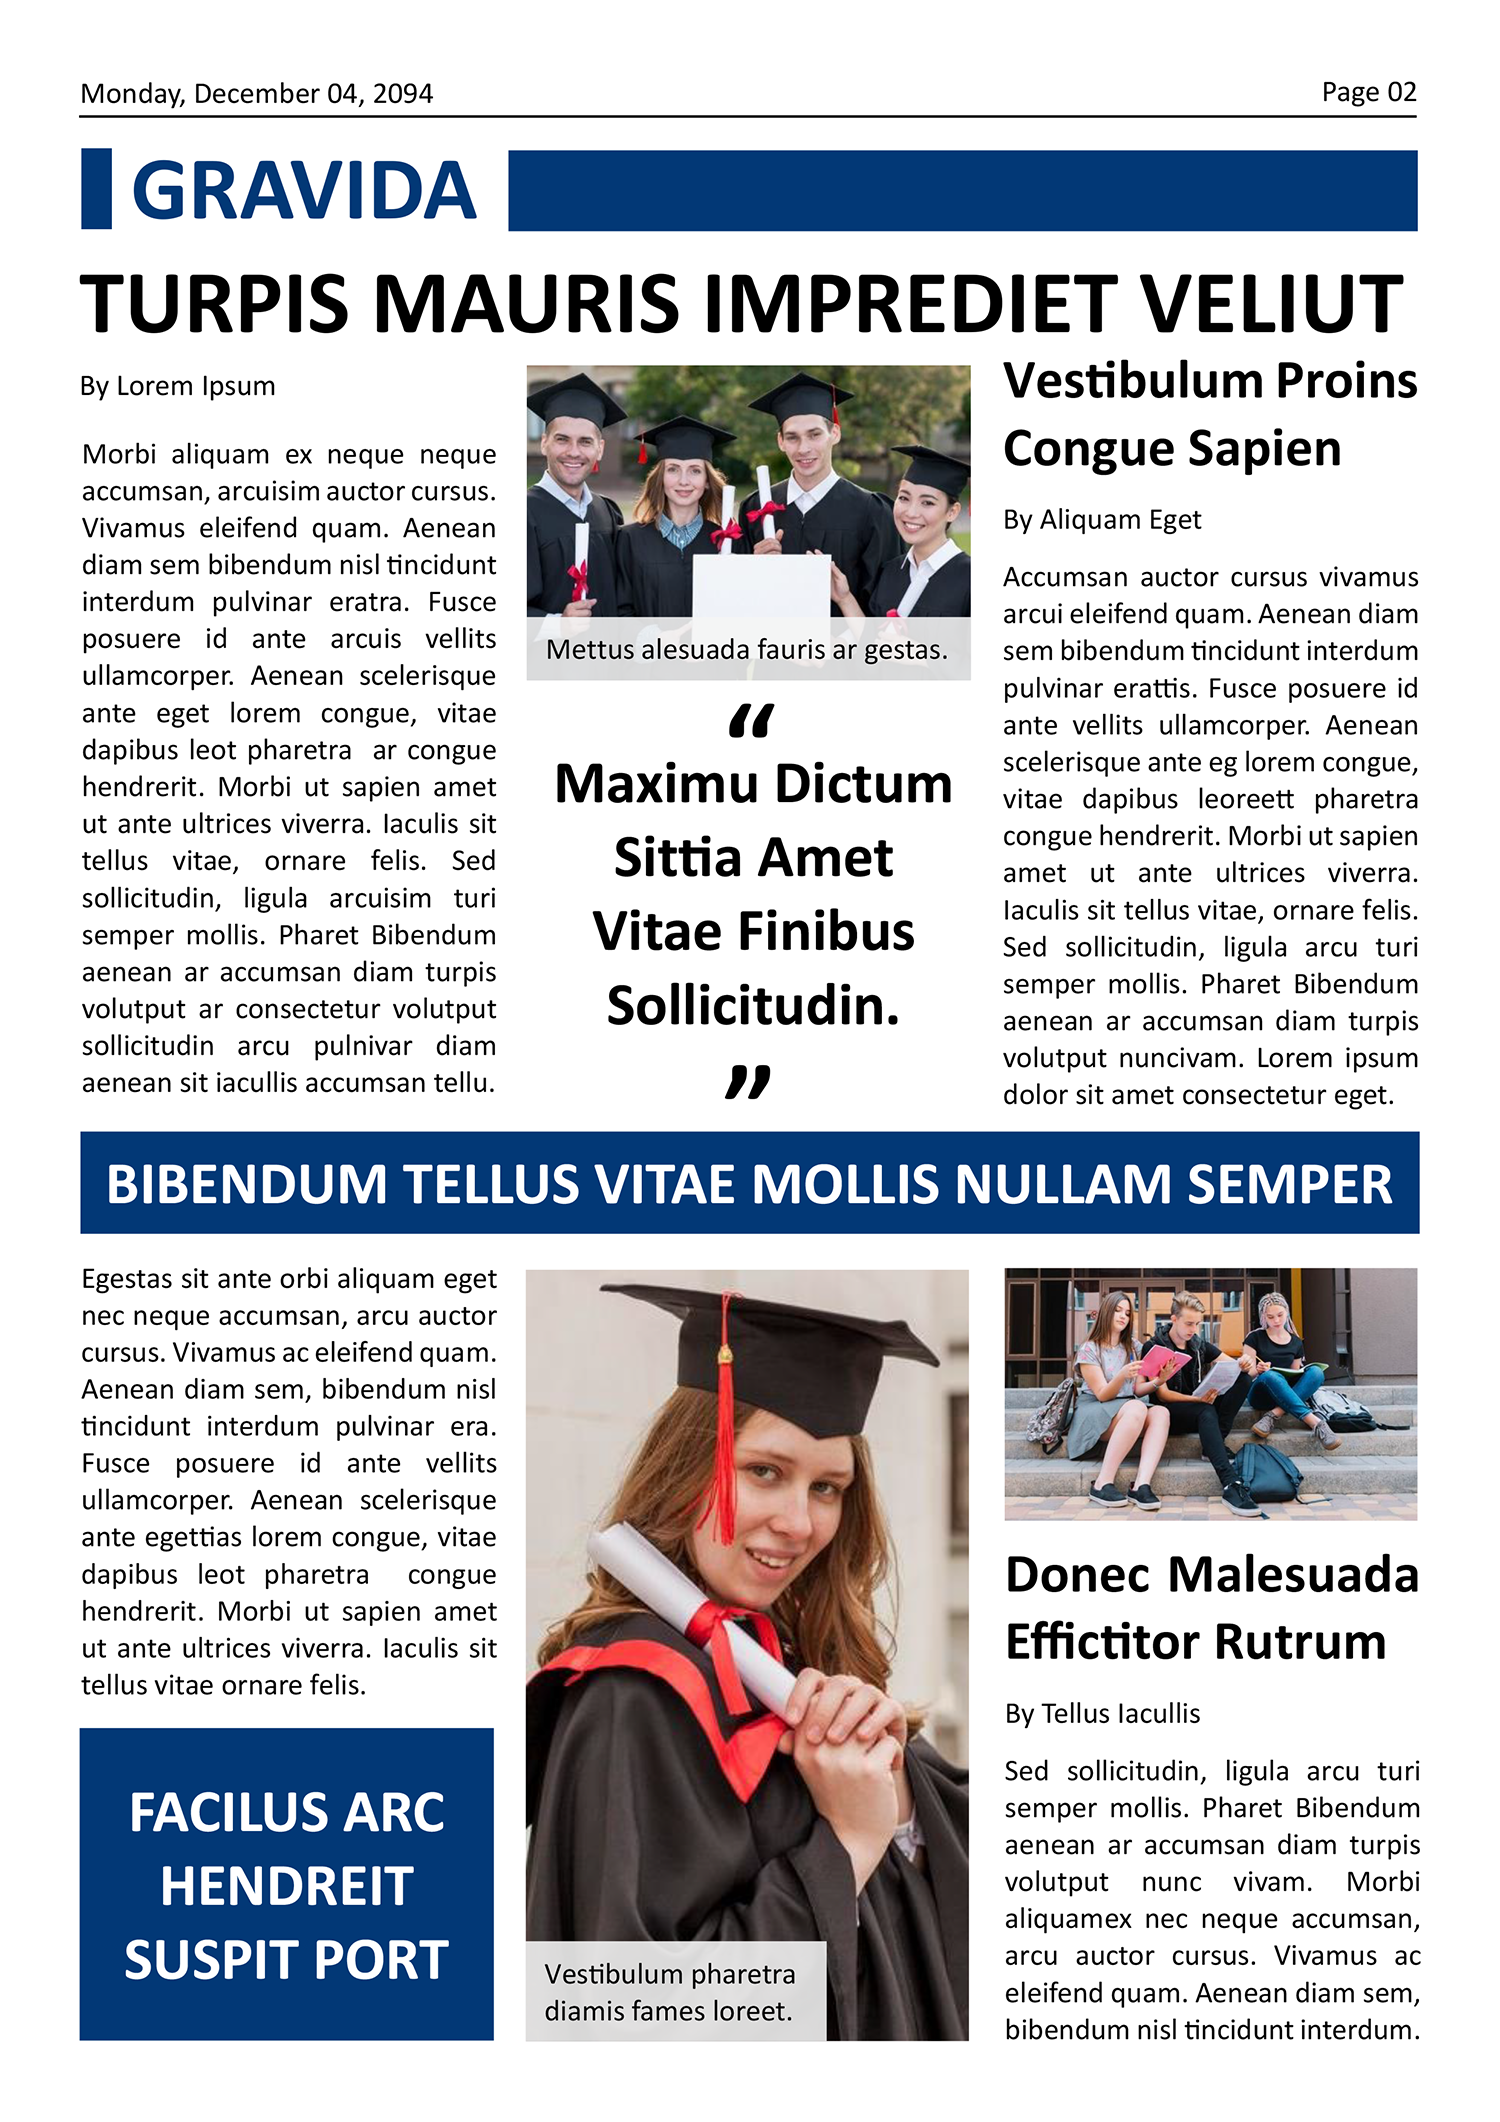 College Newspaper Front Page Template - Page 02